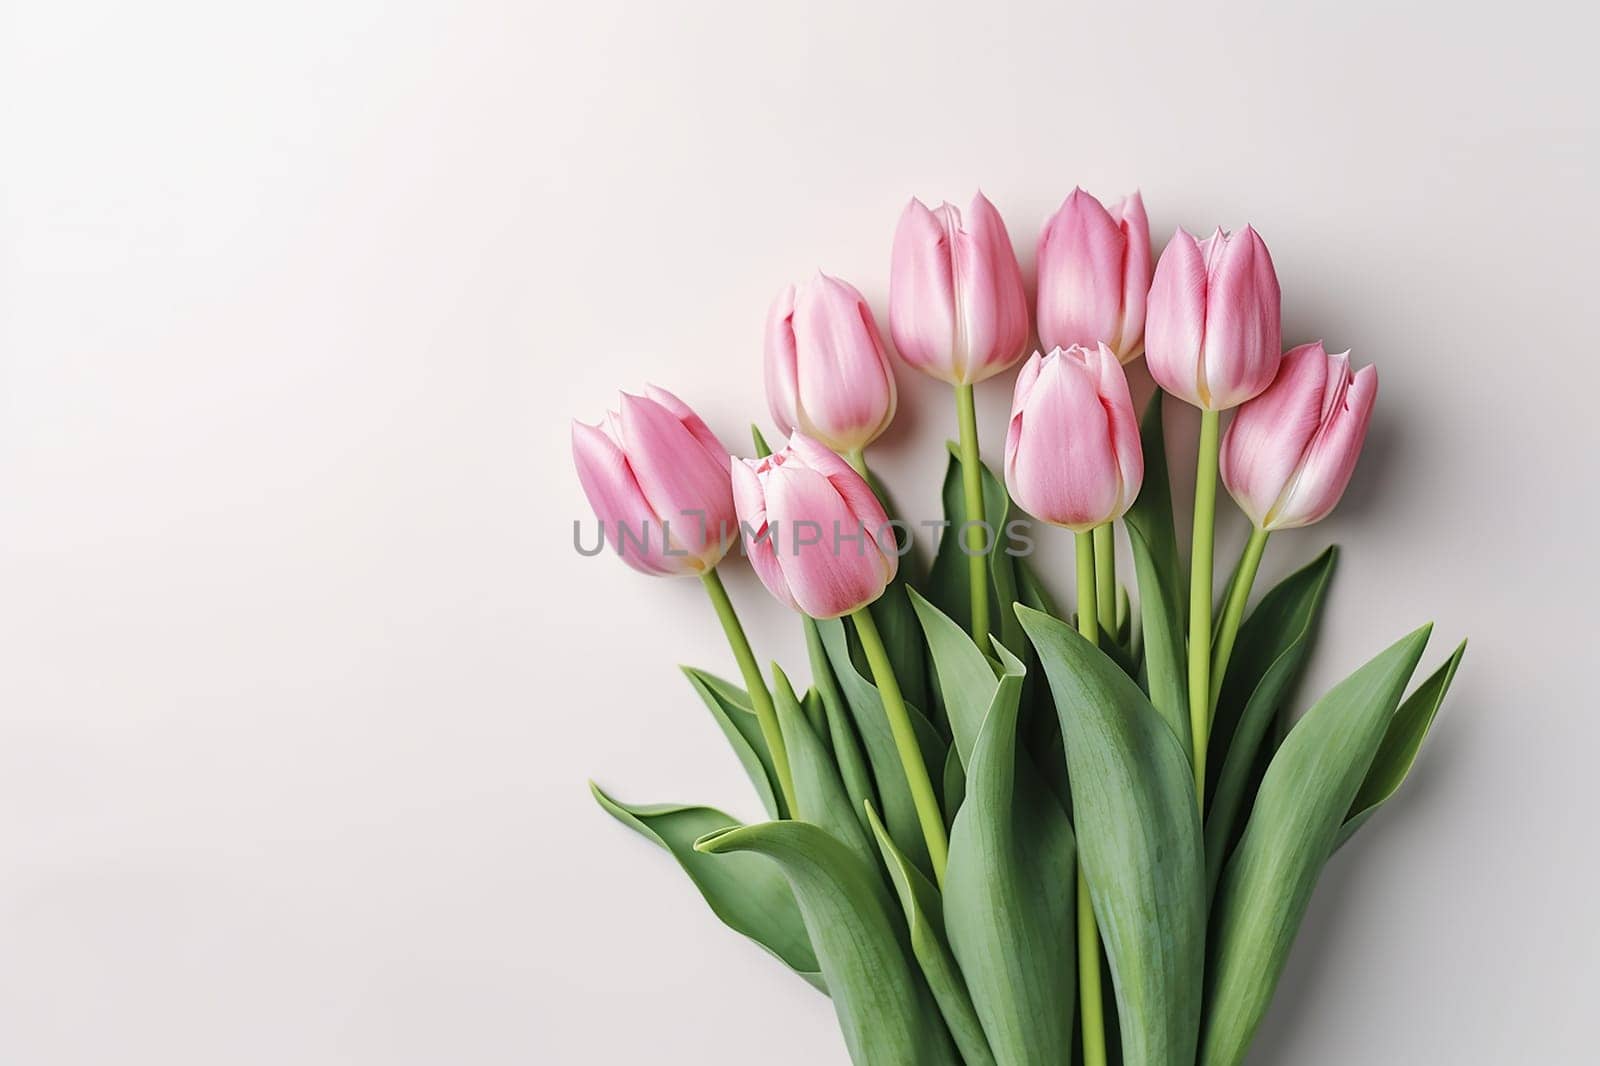 A bouquet of pink tulips against a plain background.